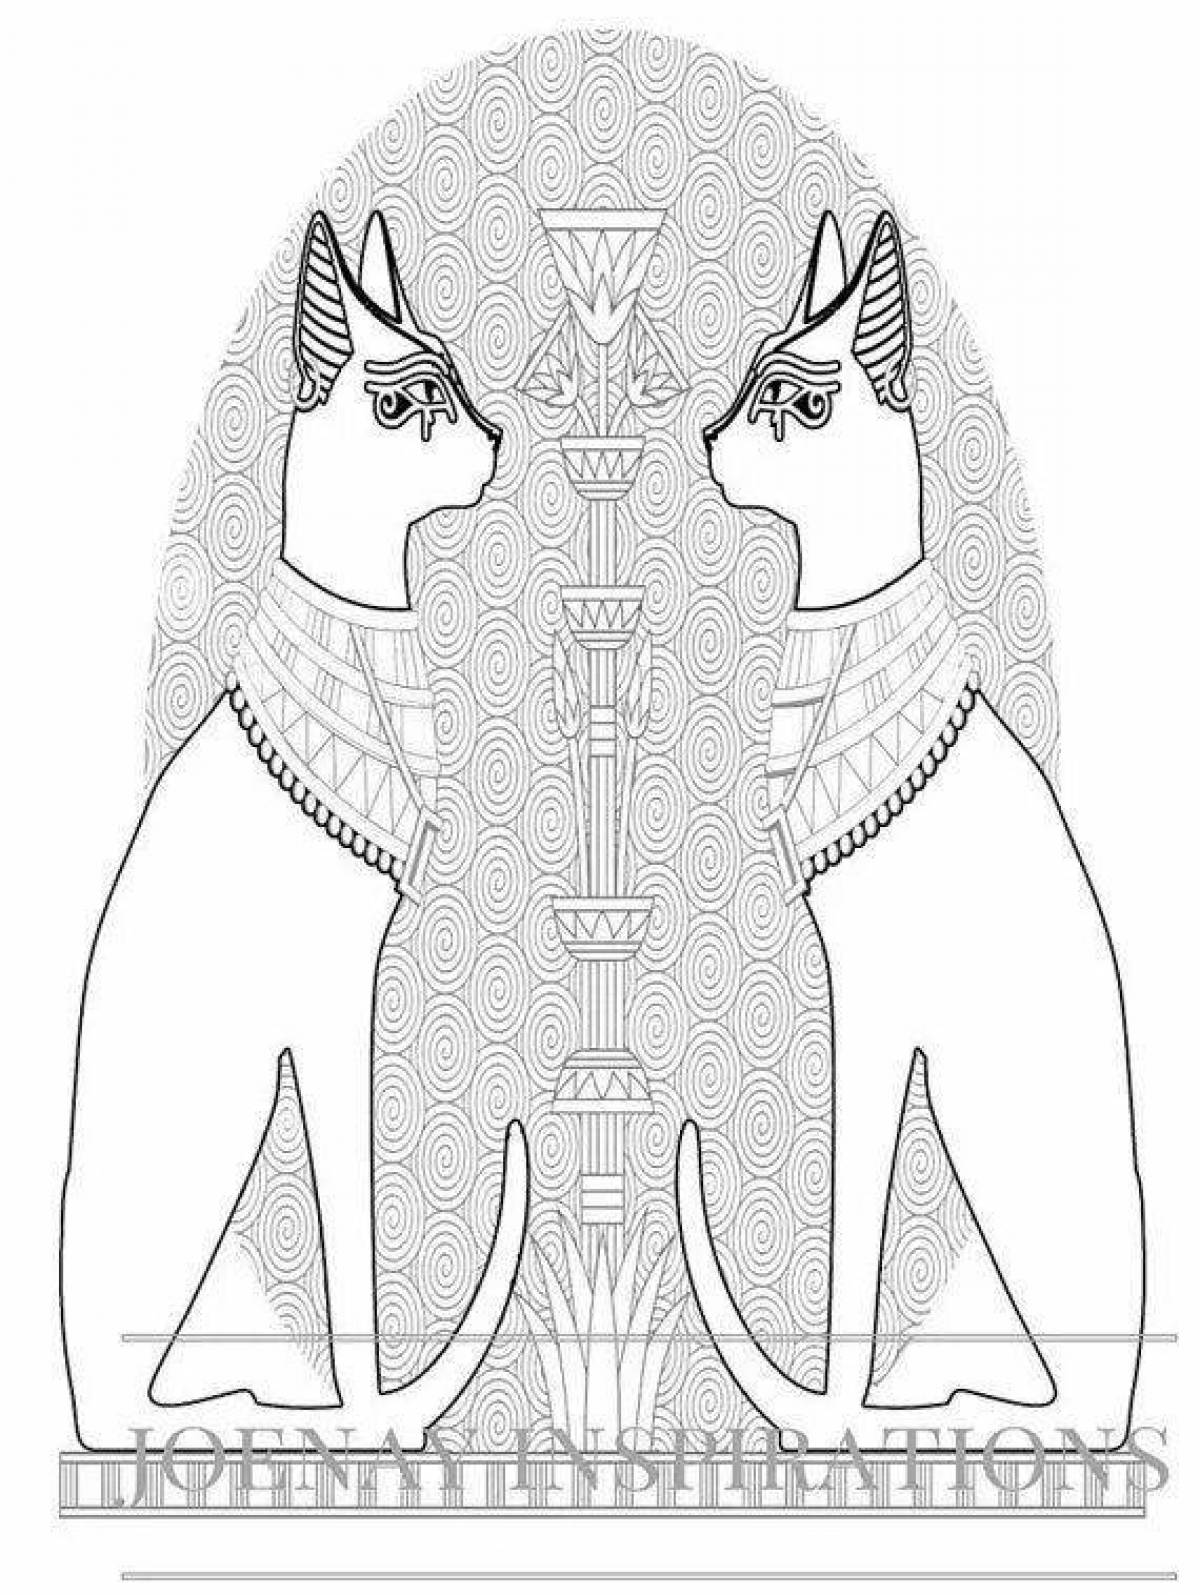 Coloring page dazzling Egyptian cat